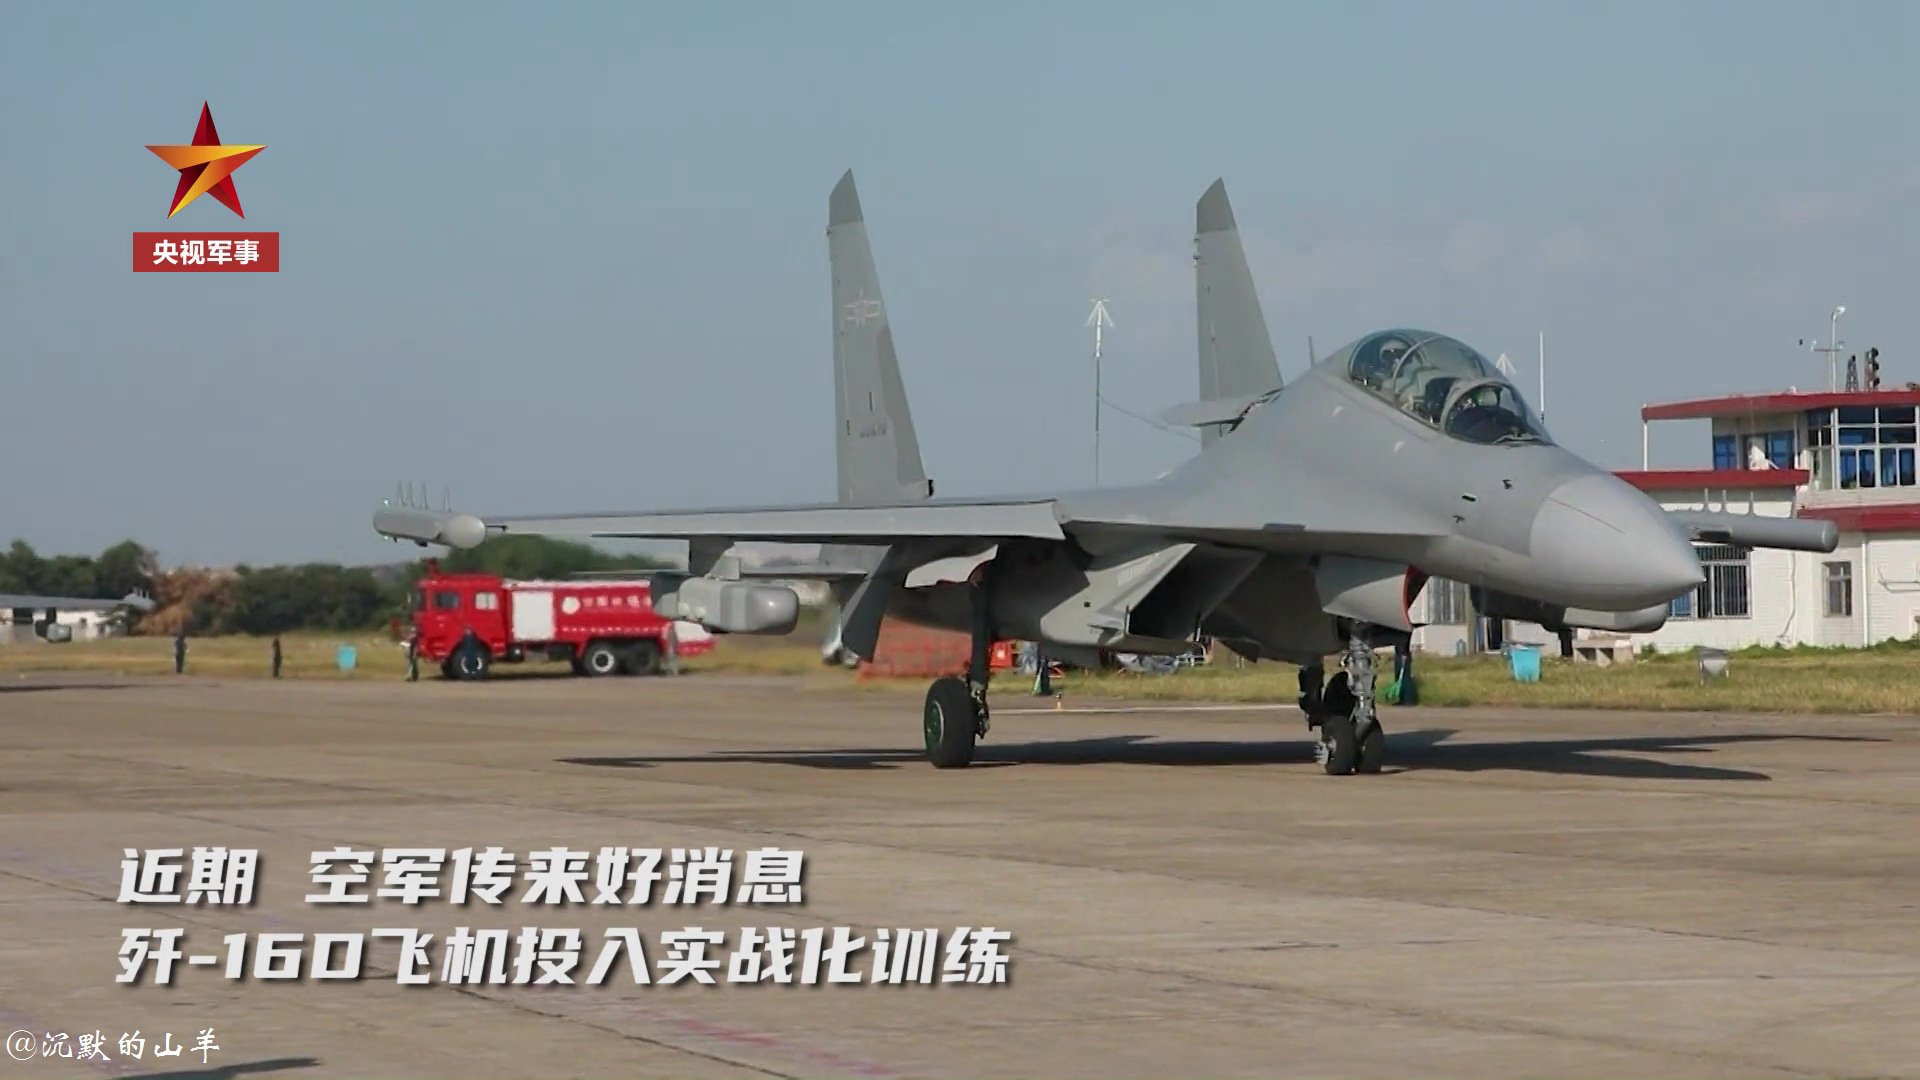 Rupprecht_A on Twitter: "As expected, the J-16D EW-variant of the regular J-16 multirole fighter, which was unveiled to the public during the latest Zhuhai Airshow is in service already. These video images